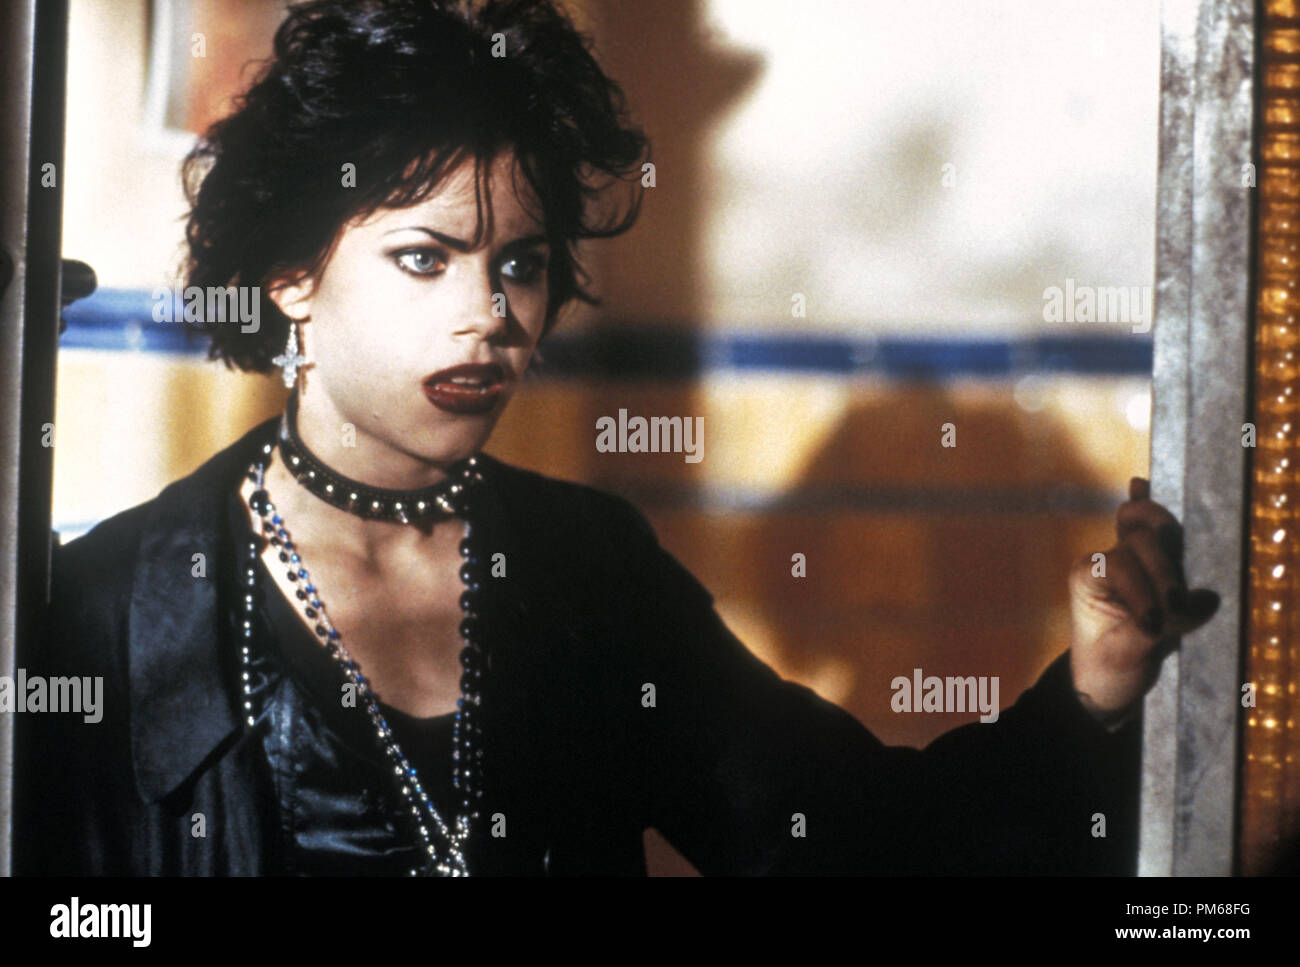 Film Still from 'The Craft' Fairuza Balk © 1996 Columbia Photo Credit: Peter Iovino   File Reference # 31042171THA  For Editorial Use Only - All Rights Reserved Stock Photo